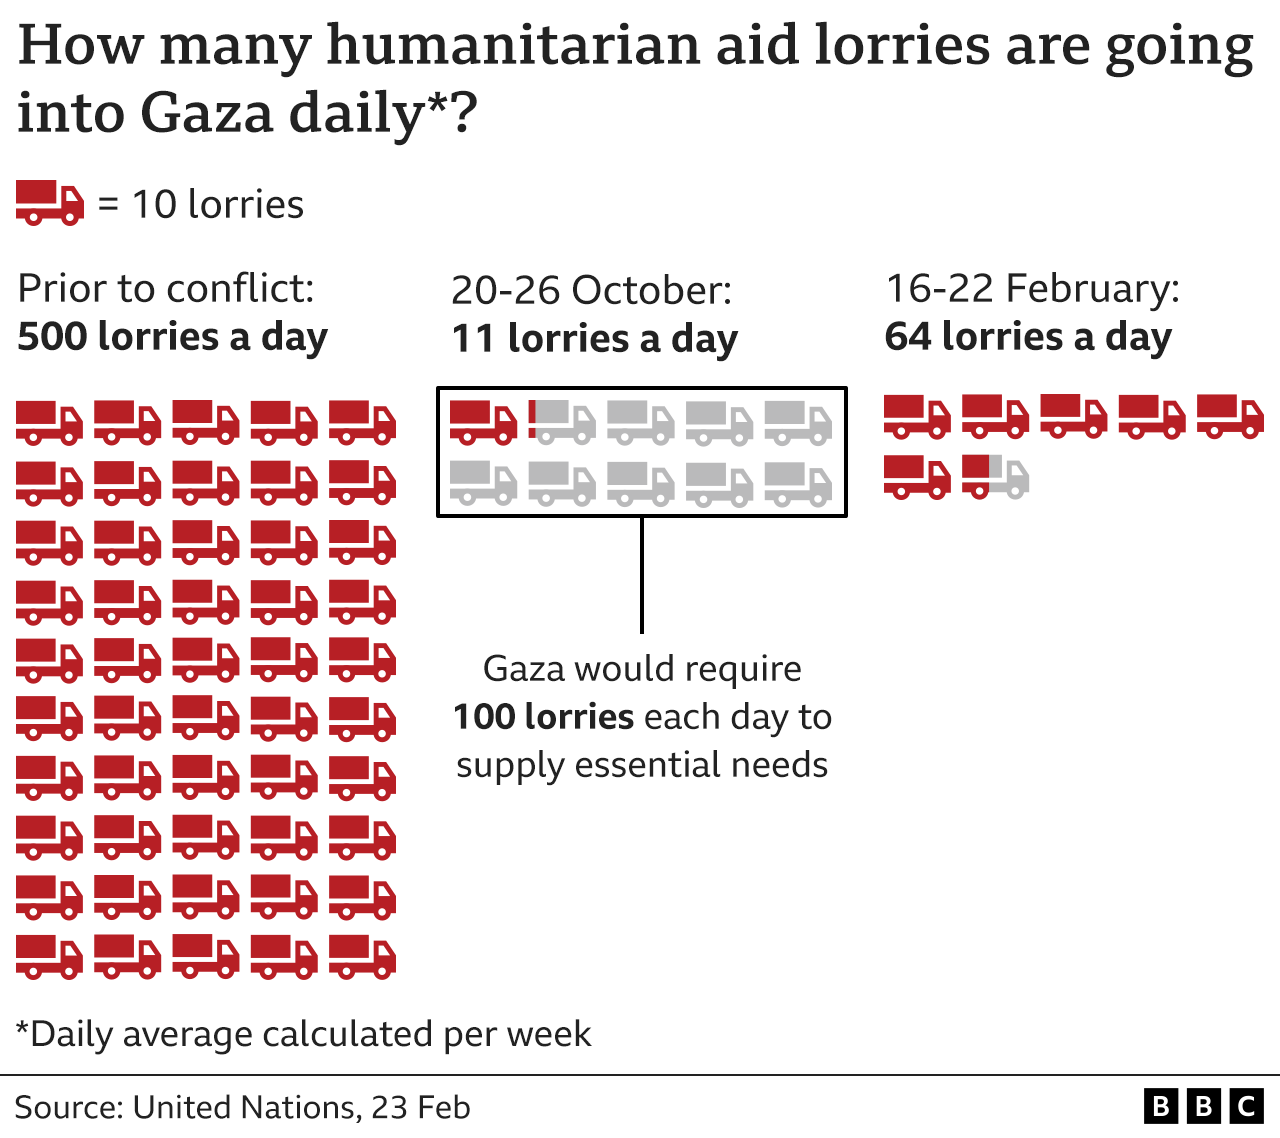 Graphic showing the number of aid lorries going into Gaza is now around 64 a day. Before the war it was 400-500